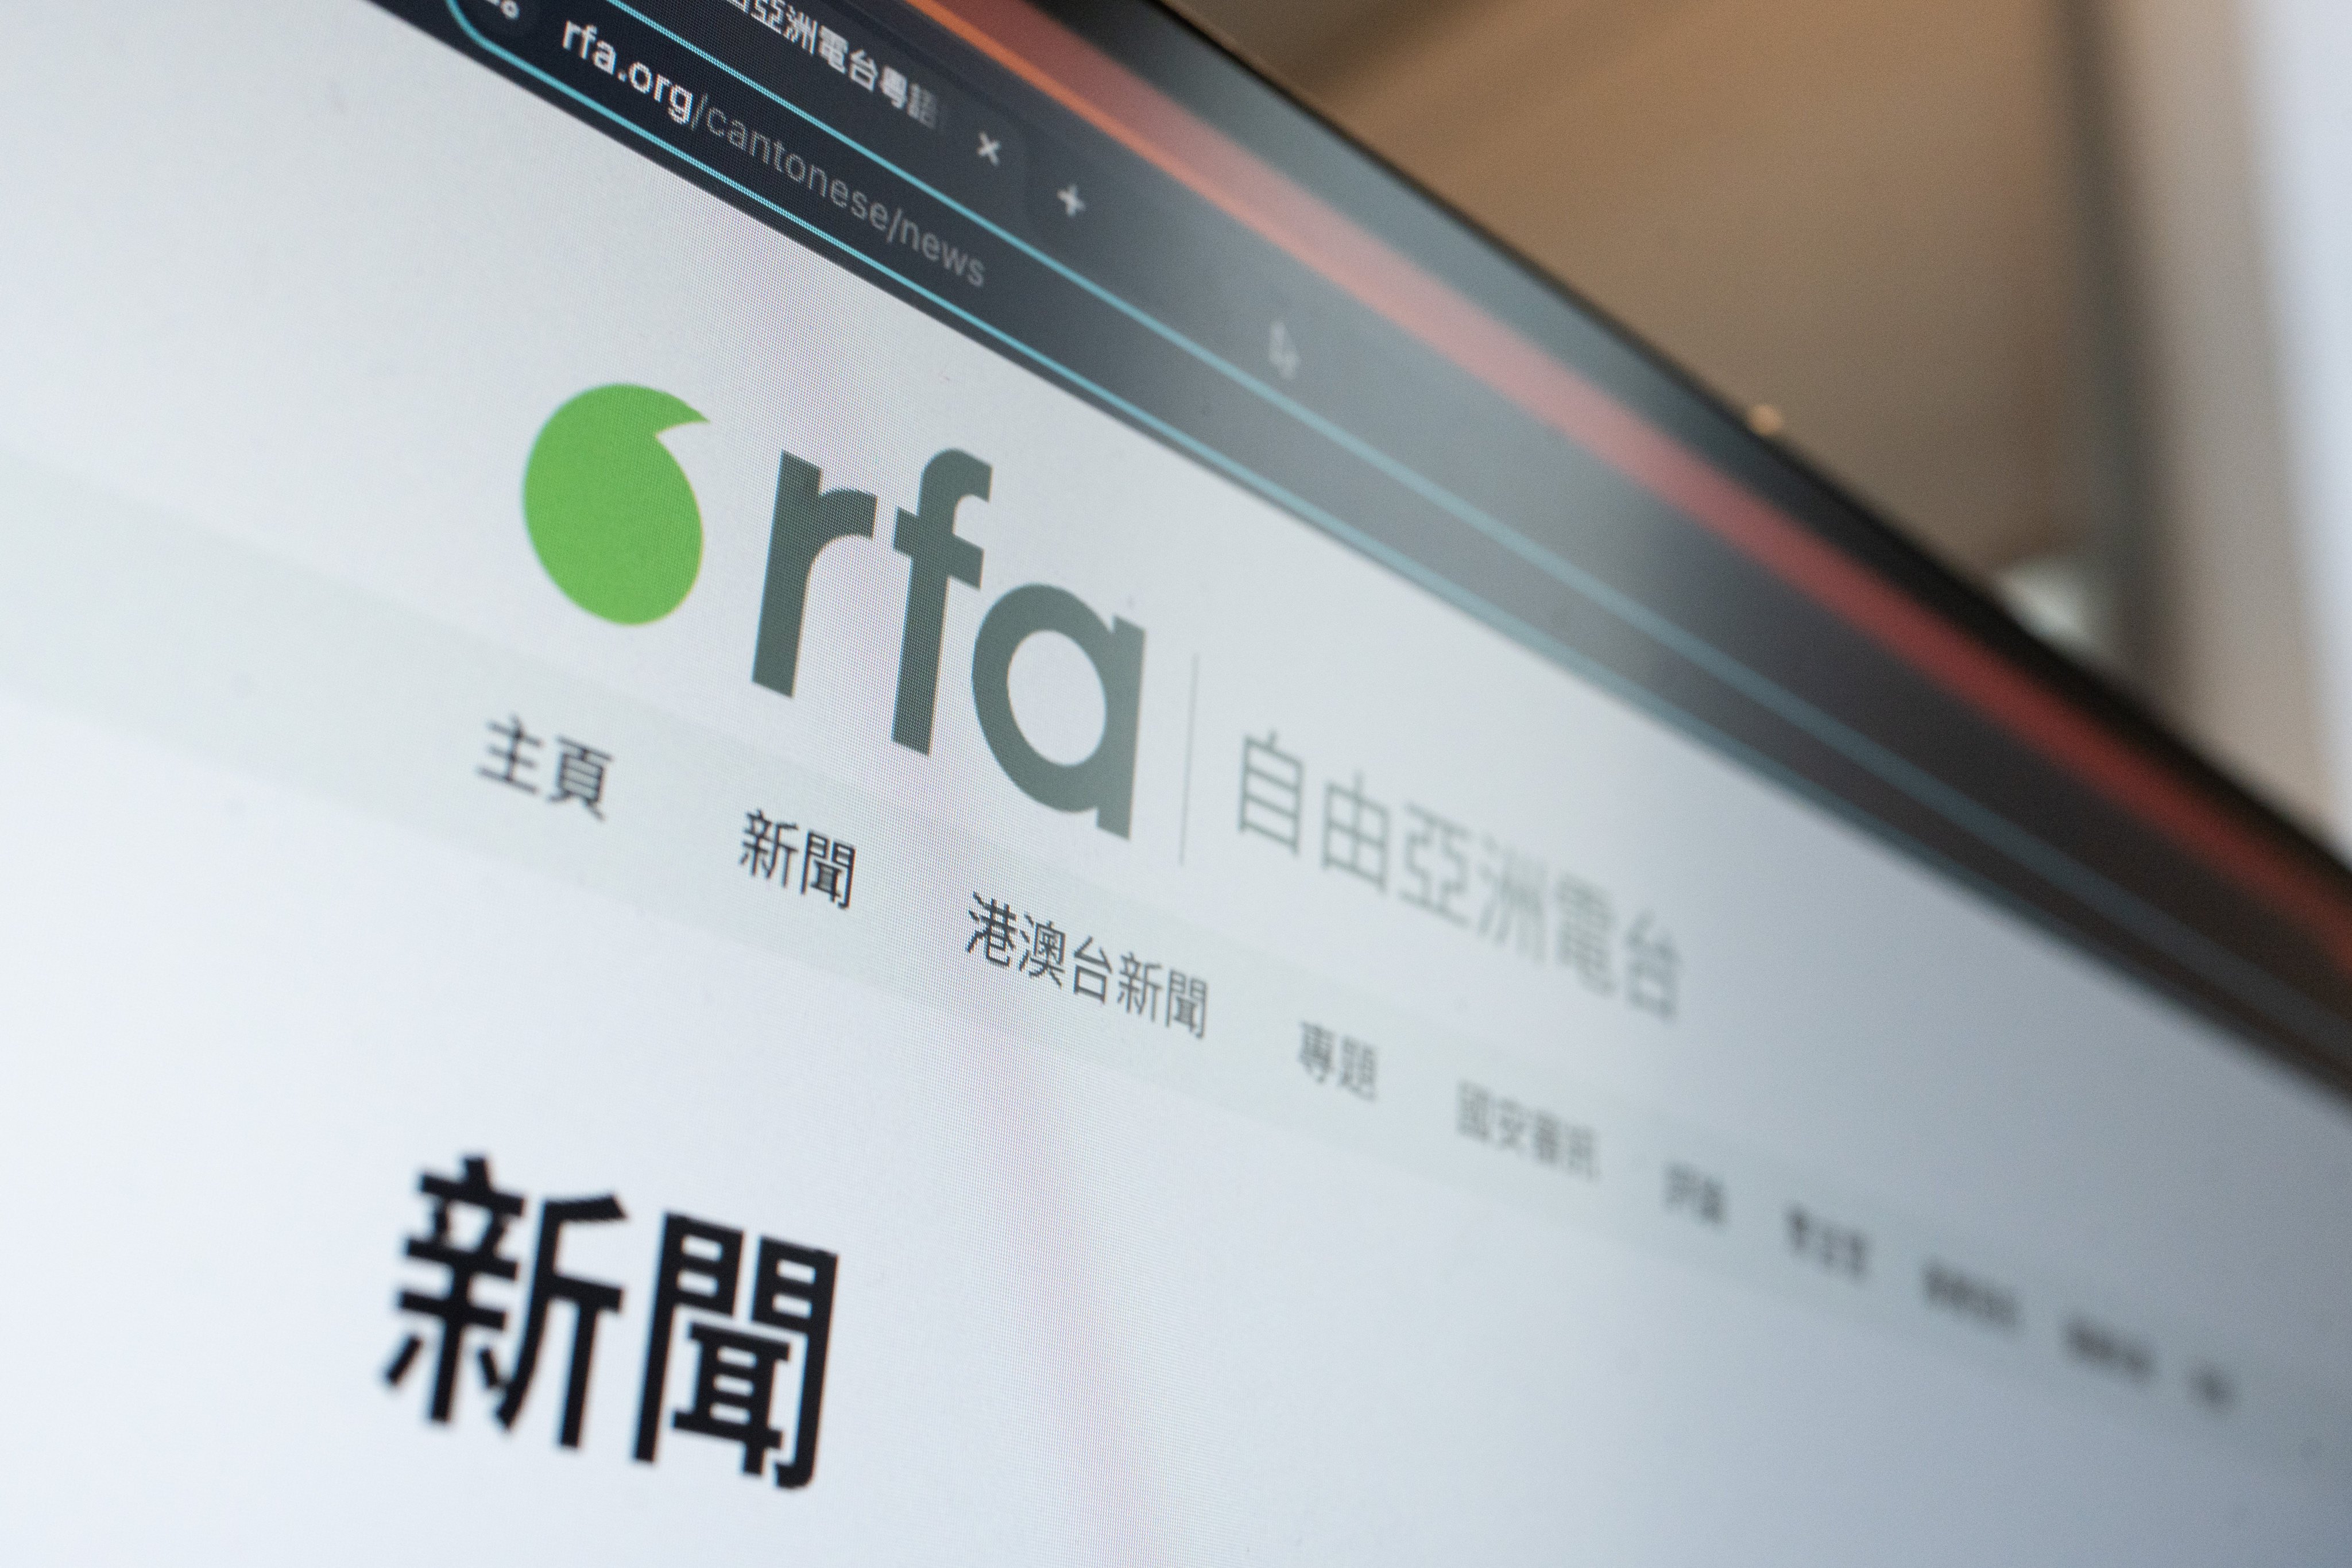 Radio Free Asia, which set up its Hong Kong bureau in 1996, has said it will “shift to using a different journalistic model reserved for a closed media environment”. Photo: Nathan Tsui